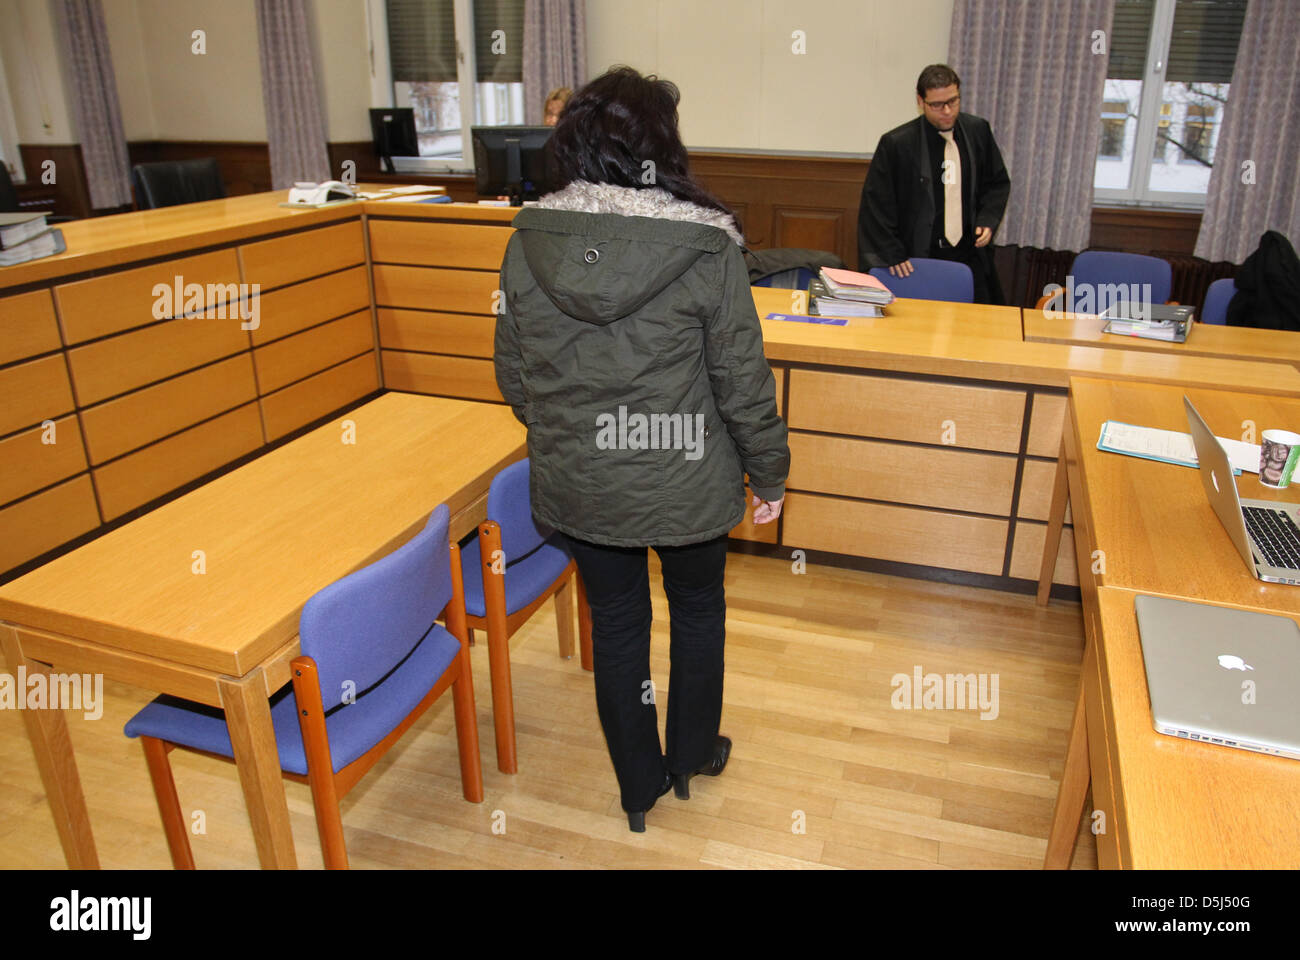 A woman arrives at the district court in Schweinfurt, Germany, 15 November 2012. The 43-year-old woman is accused of stabbing her husband to death during a fight in December 2011. Photo: Karl-Josef Hildenbrand Stock Photo